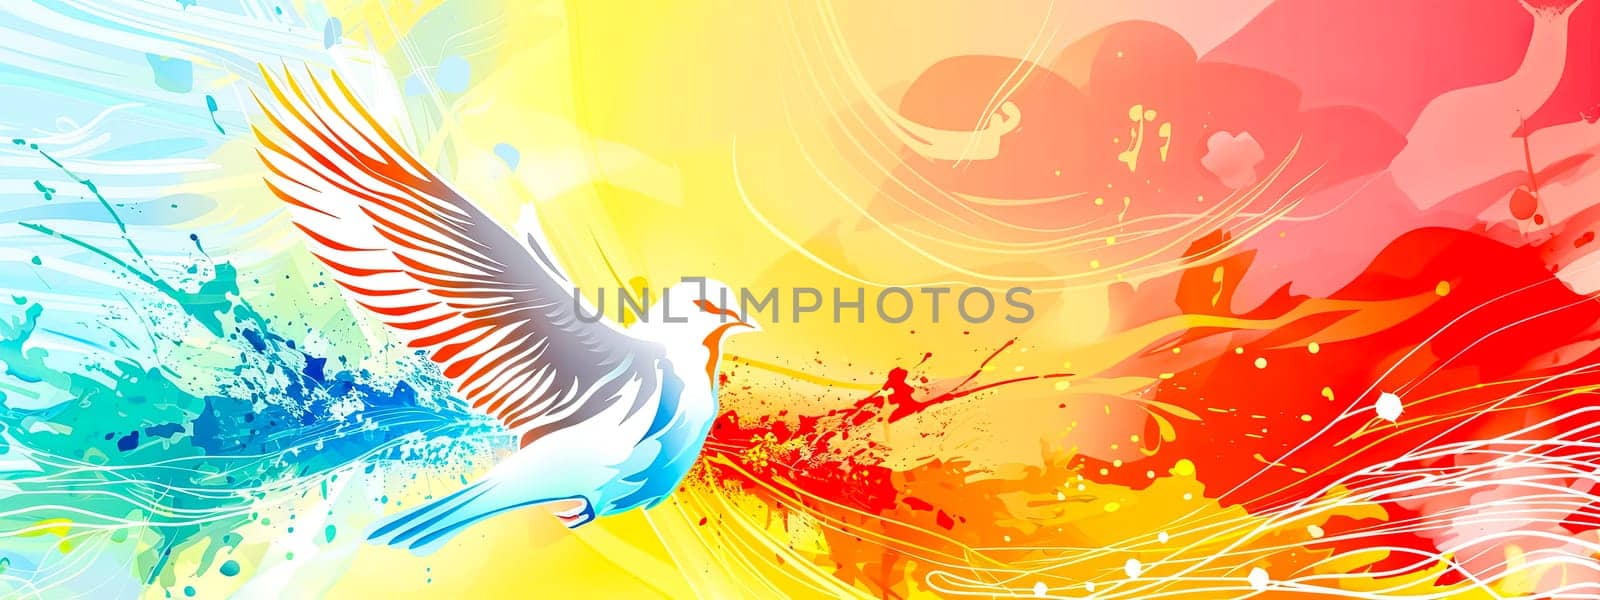 A white dove flies over a vibrant sunset, symbolizing peace and hope. by Edophoto